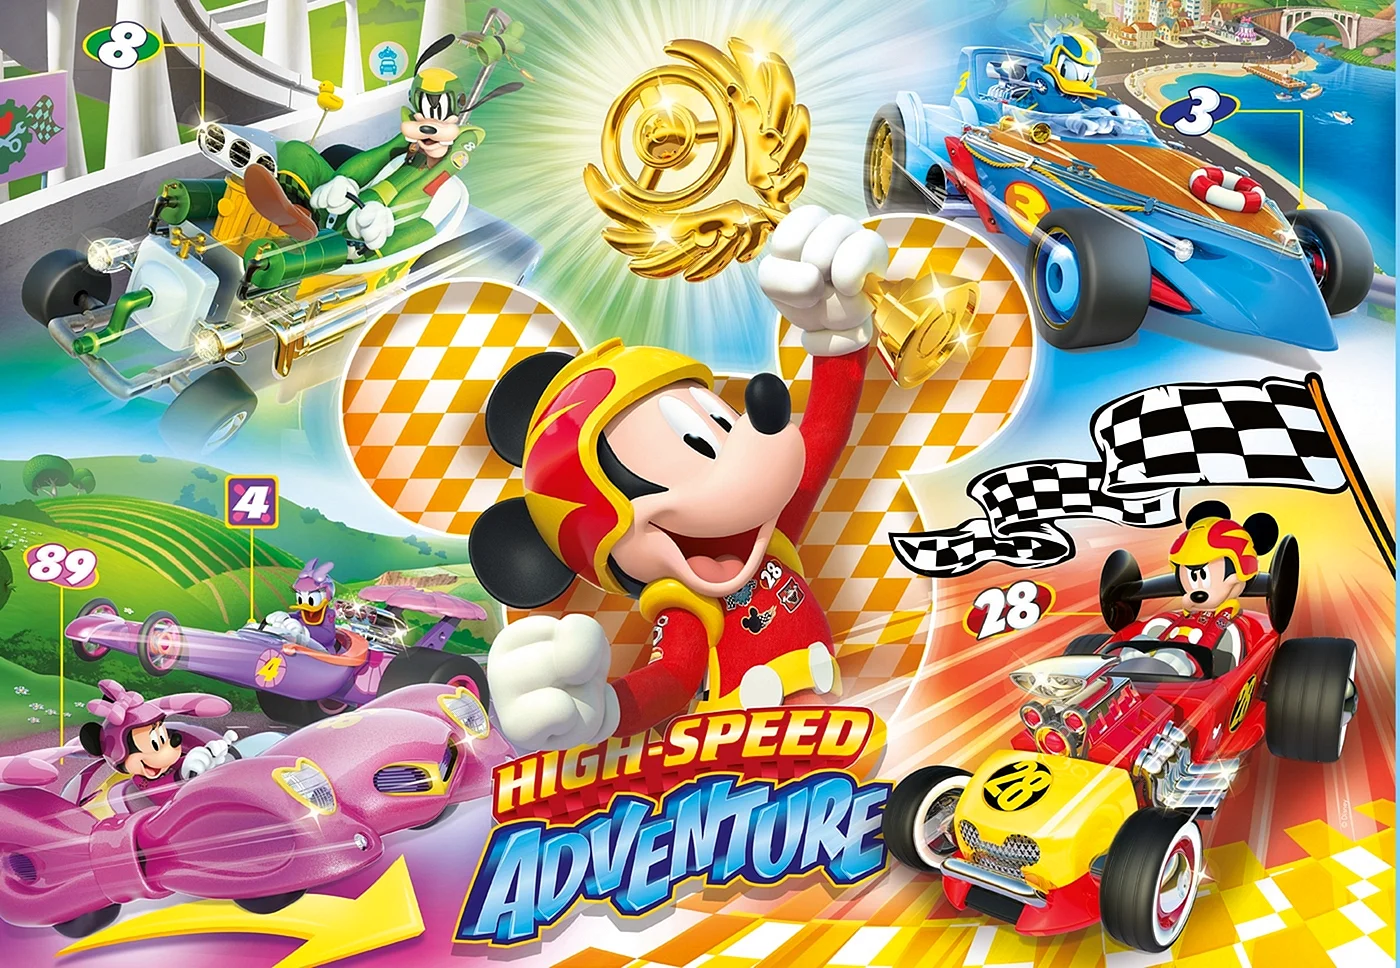 Mickey And The Roadster Racers Wallpaper